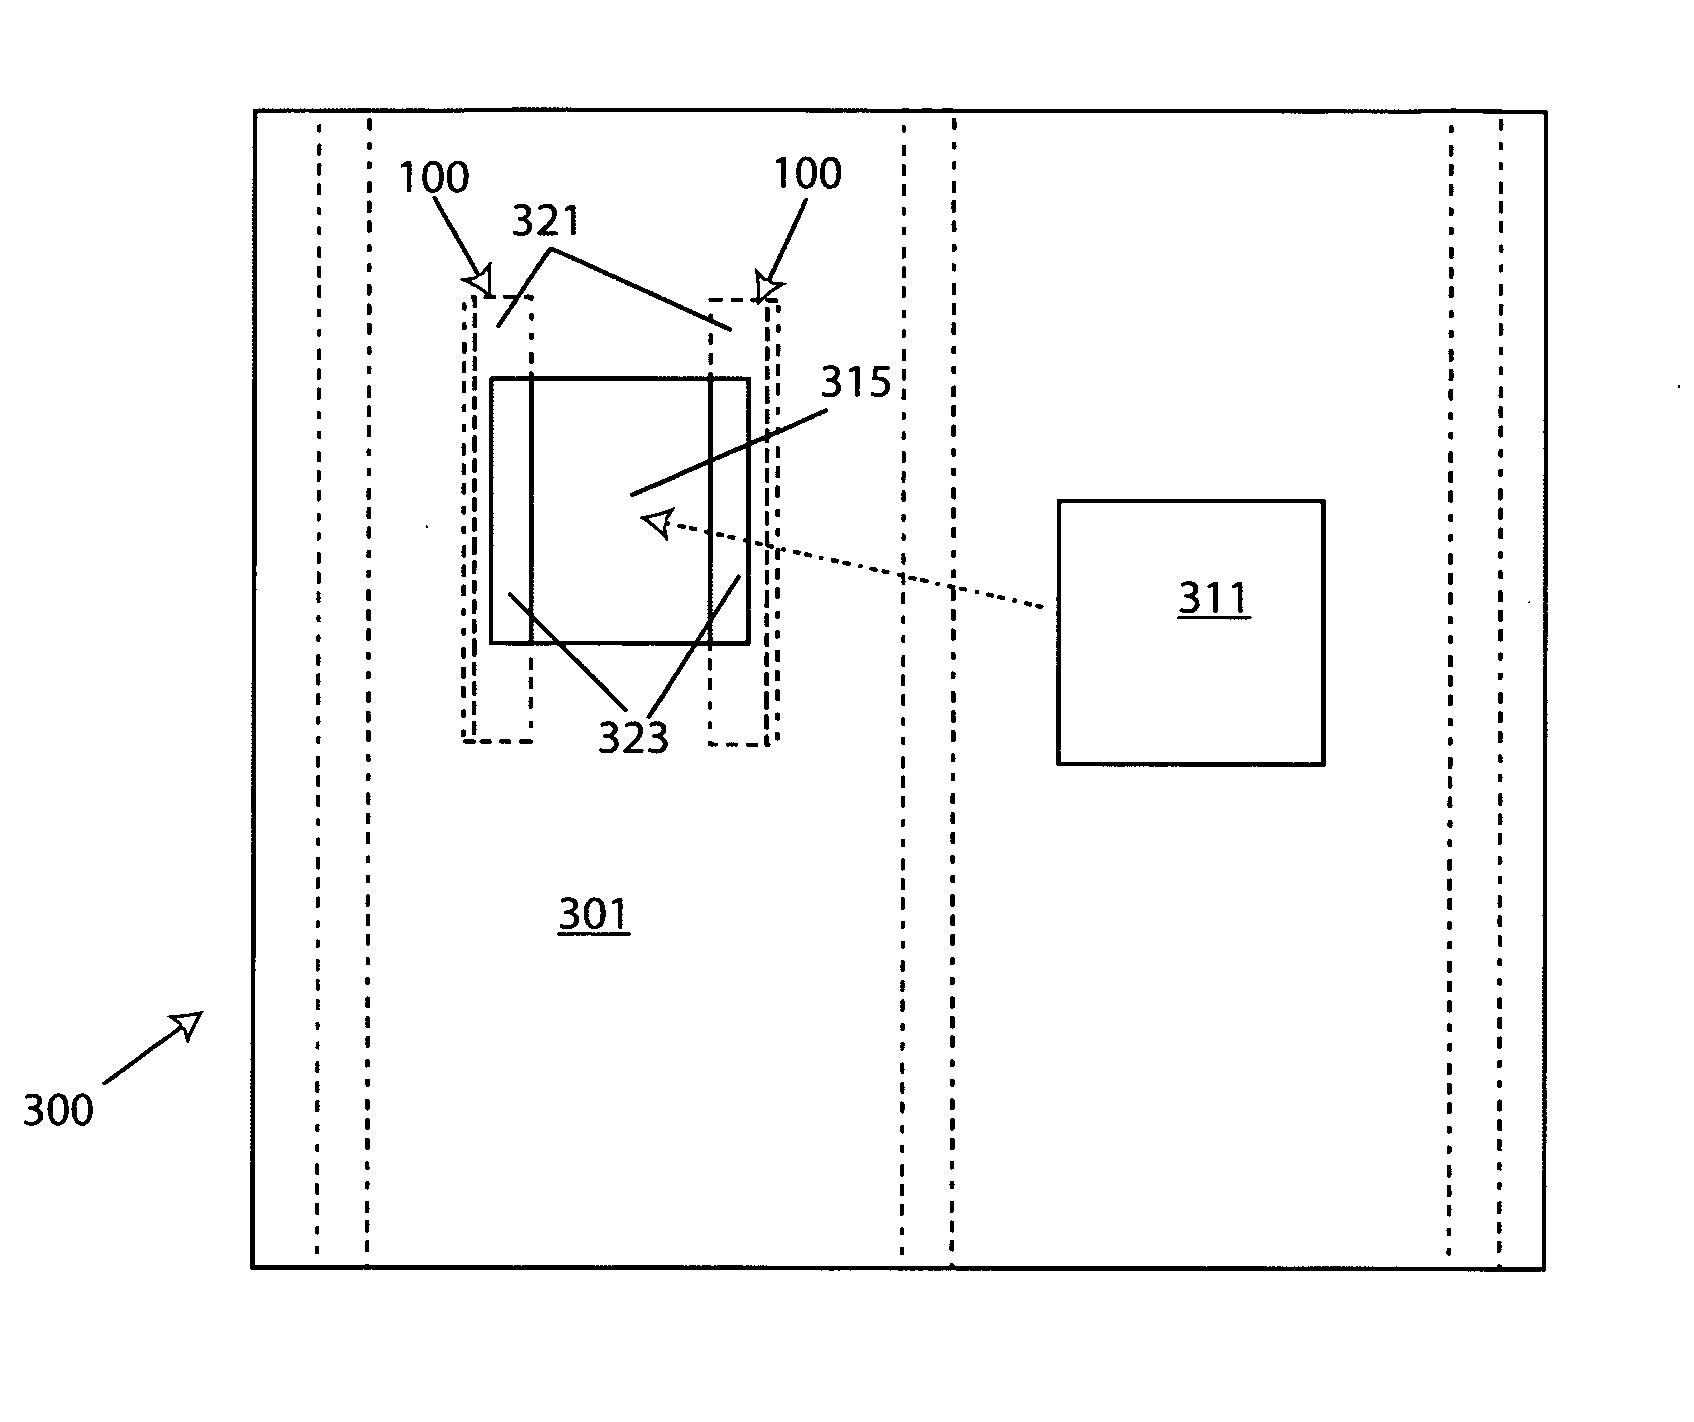 Multipurpose apparatus for mounting objects and repairing drywall